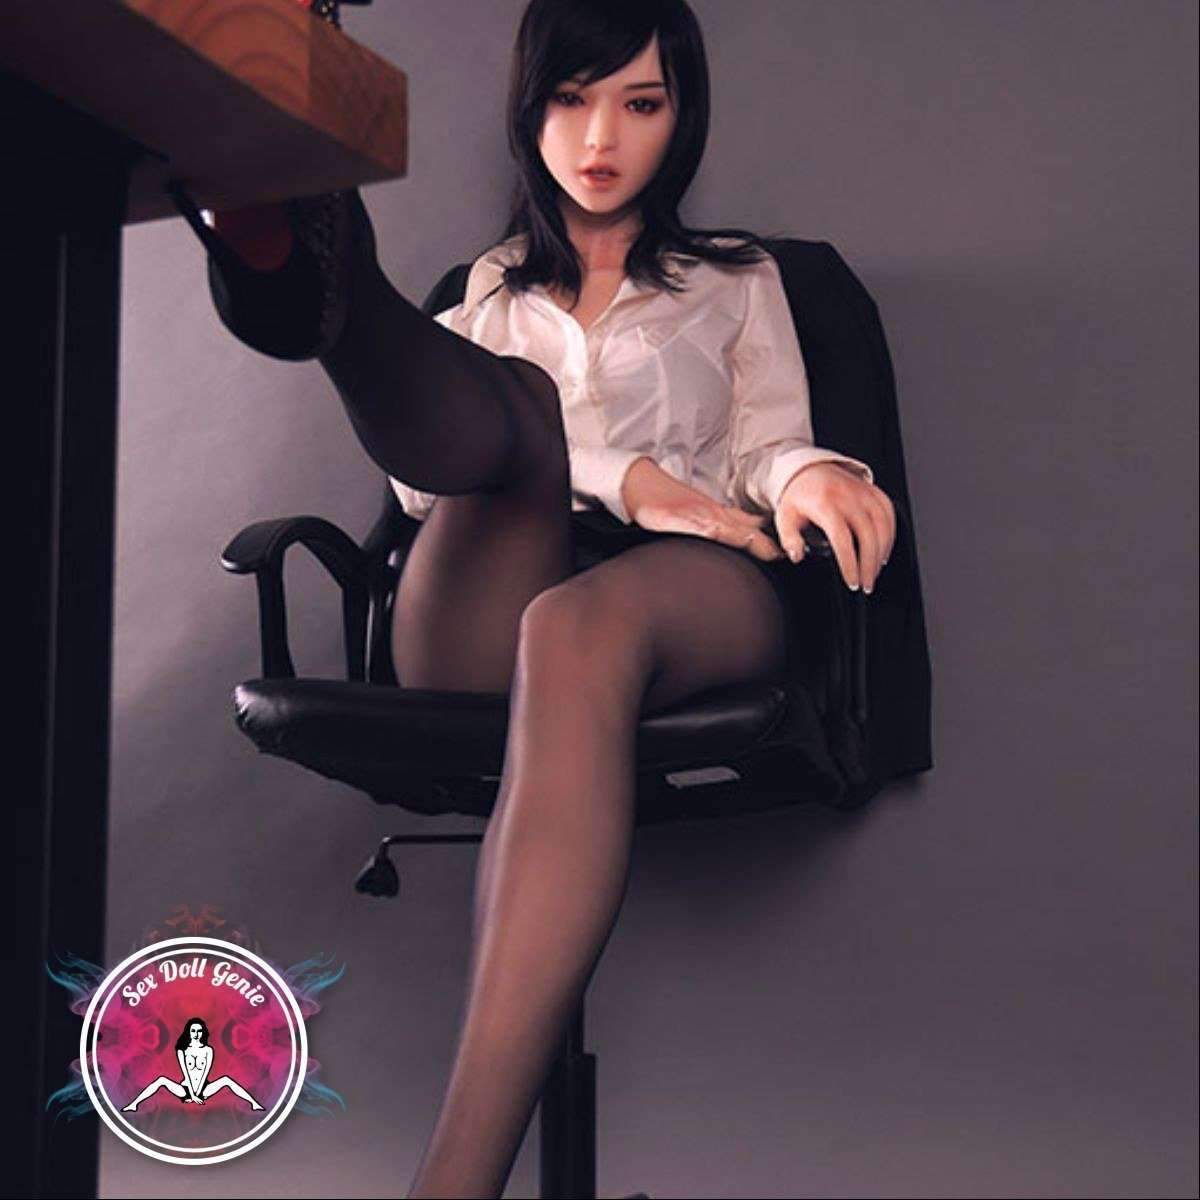 DS Doll - 167cm - Kayla Head - Type 4 D Cup Silicone Doll-5